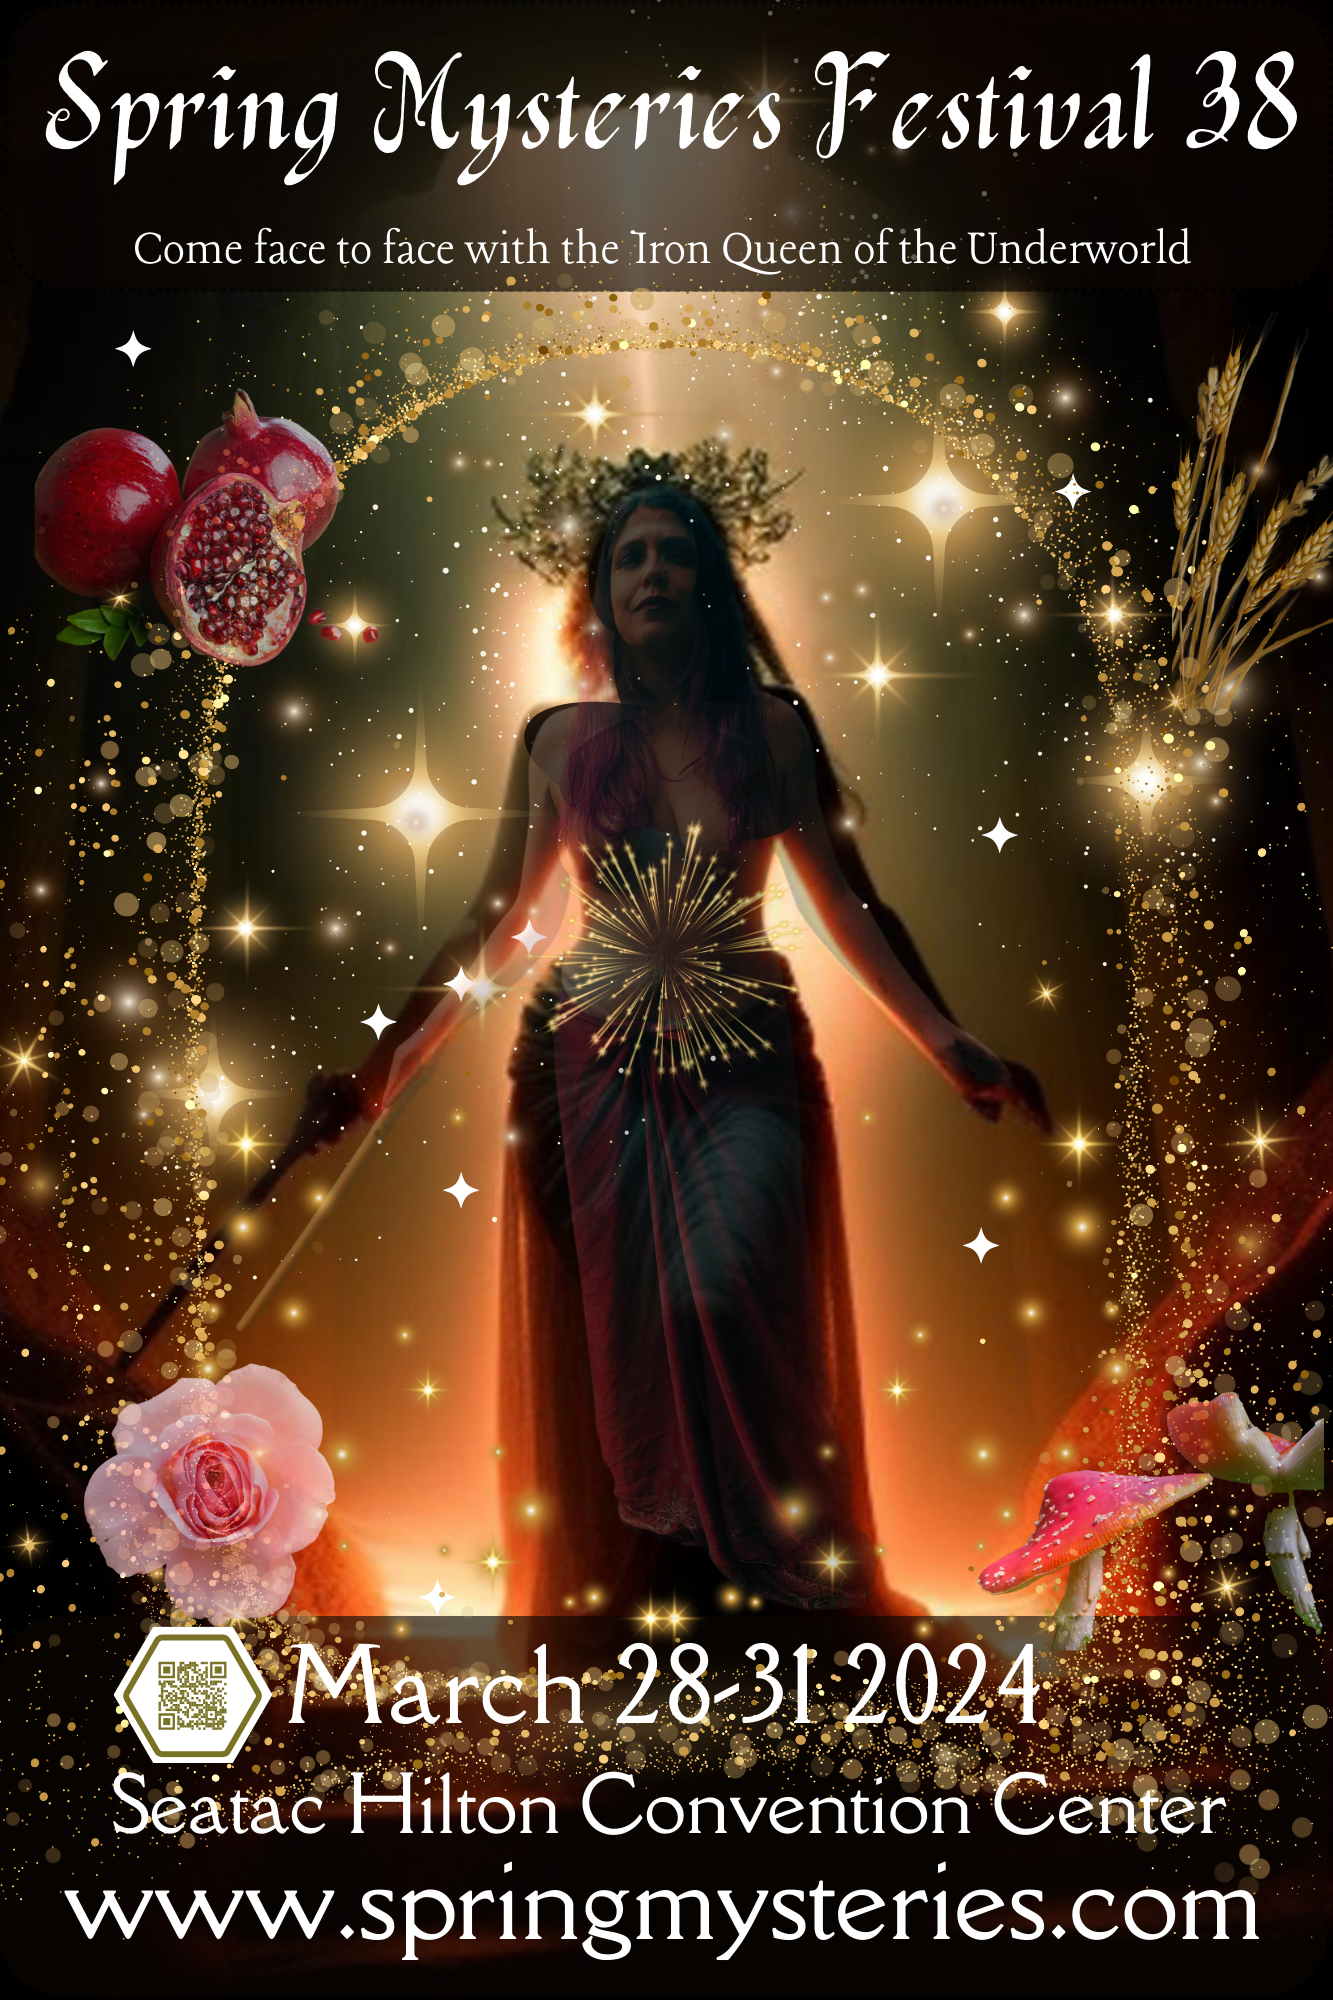 A poster for the spring mysteries festival, a woman surrounded by sparkles.